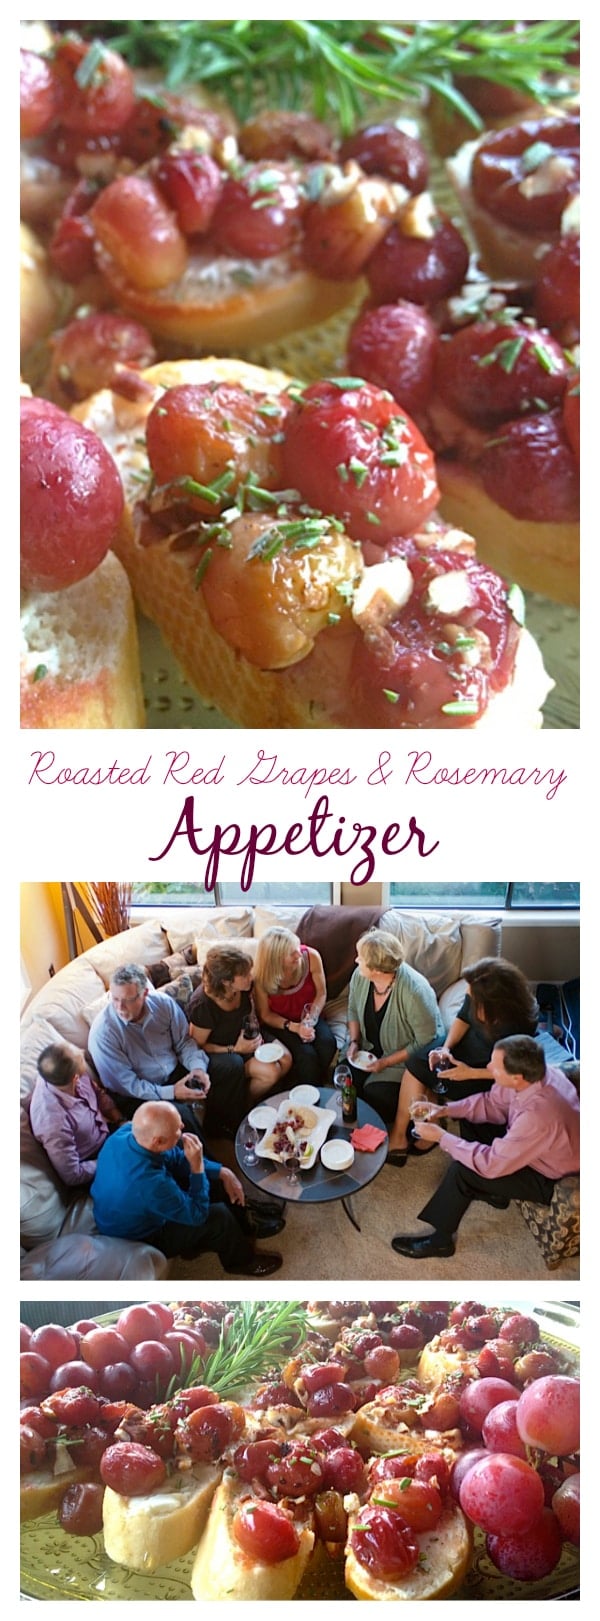 The Purpose of the Home (easy entertaining) with Roasted Red Grapes & Rosemary Appetizer